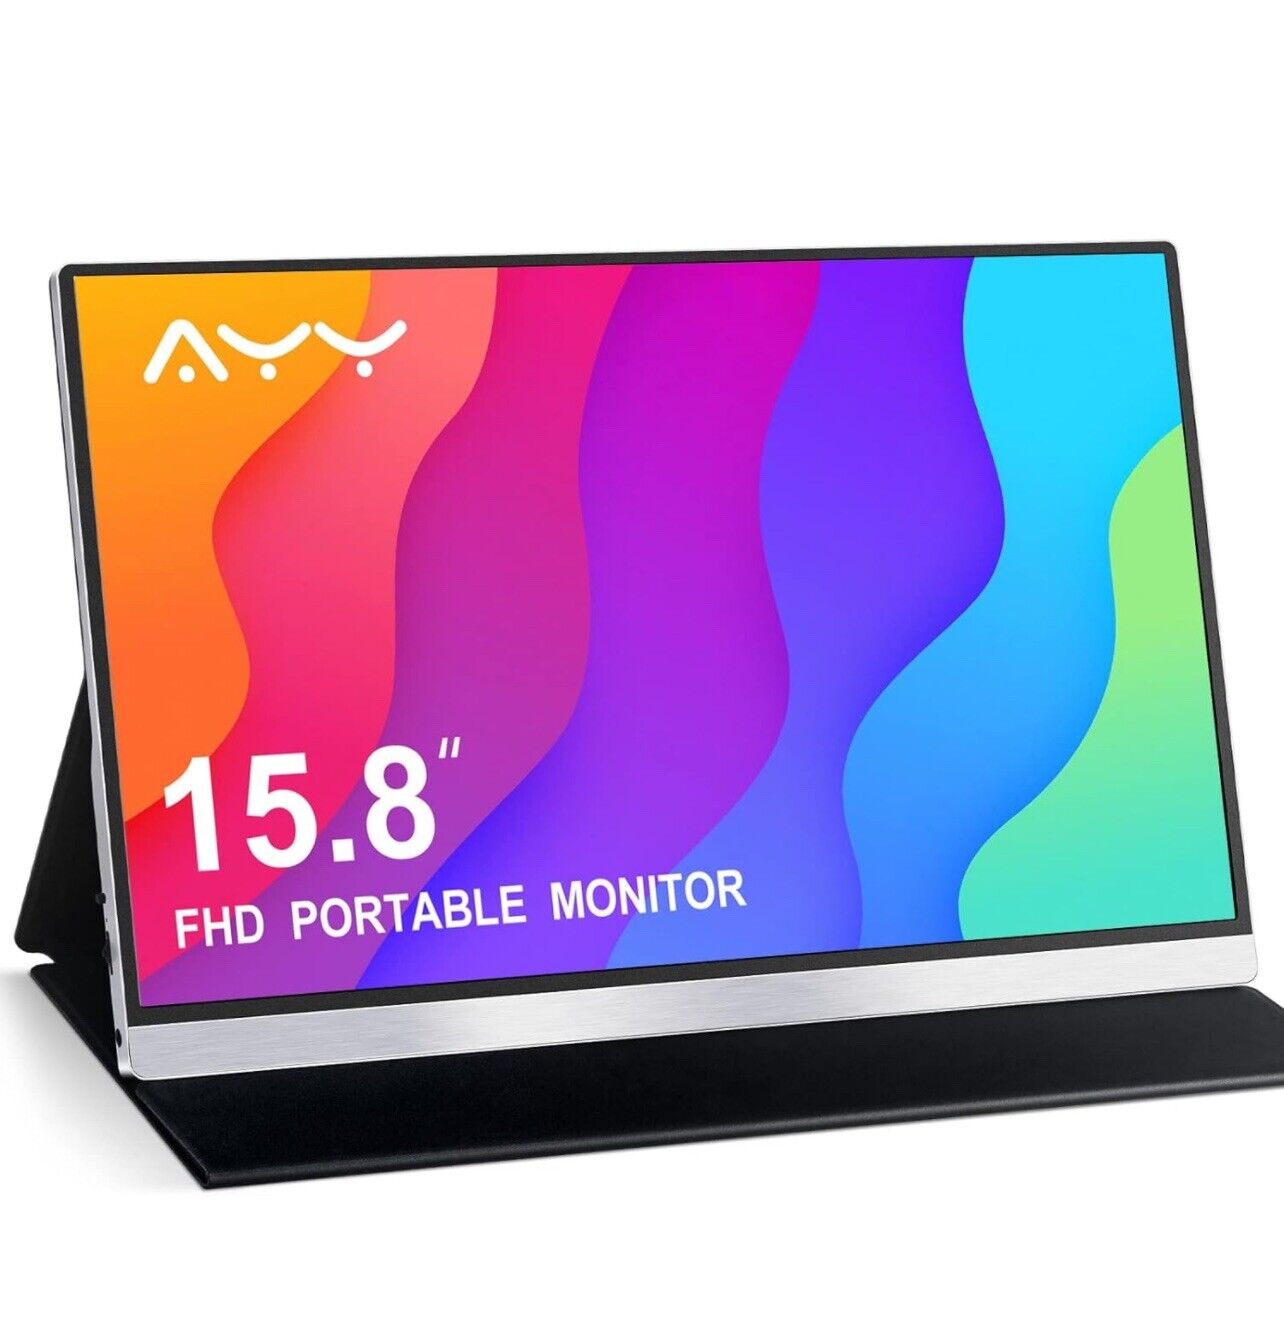 AYY Portable Monitor 15.8 Inch FHD 1080P Portable External Second Monitor HDMI